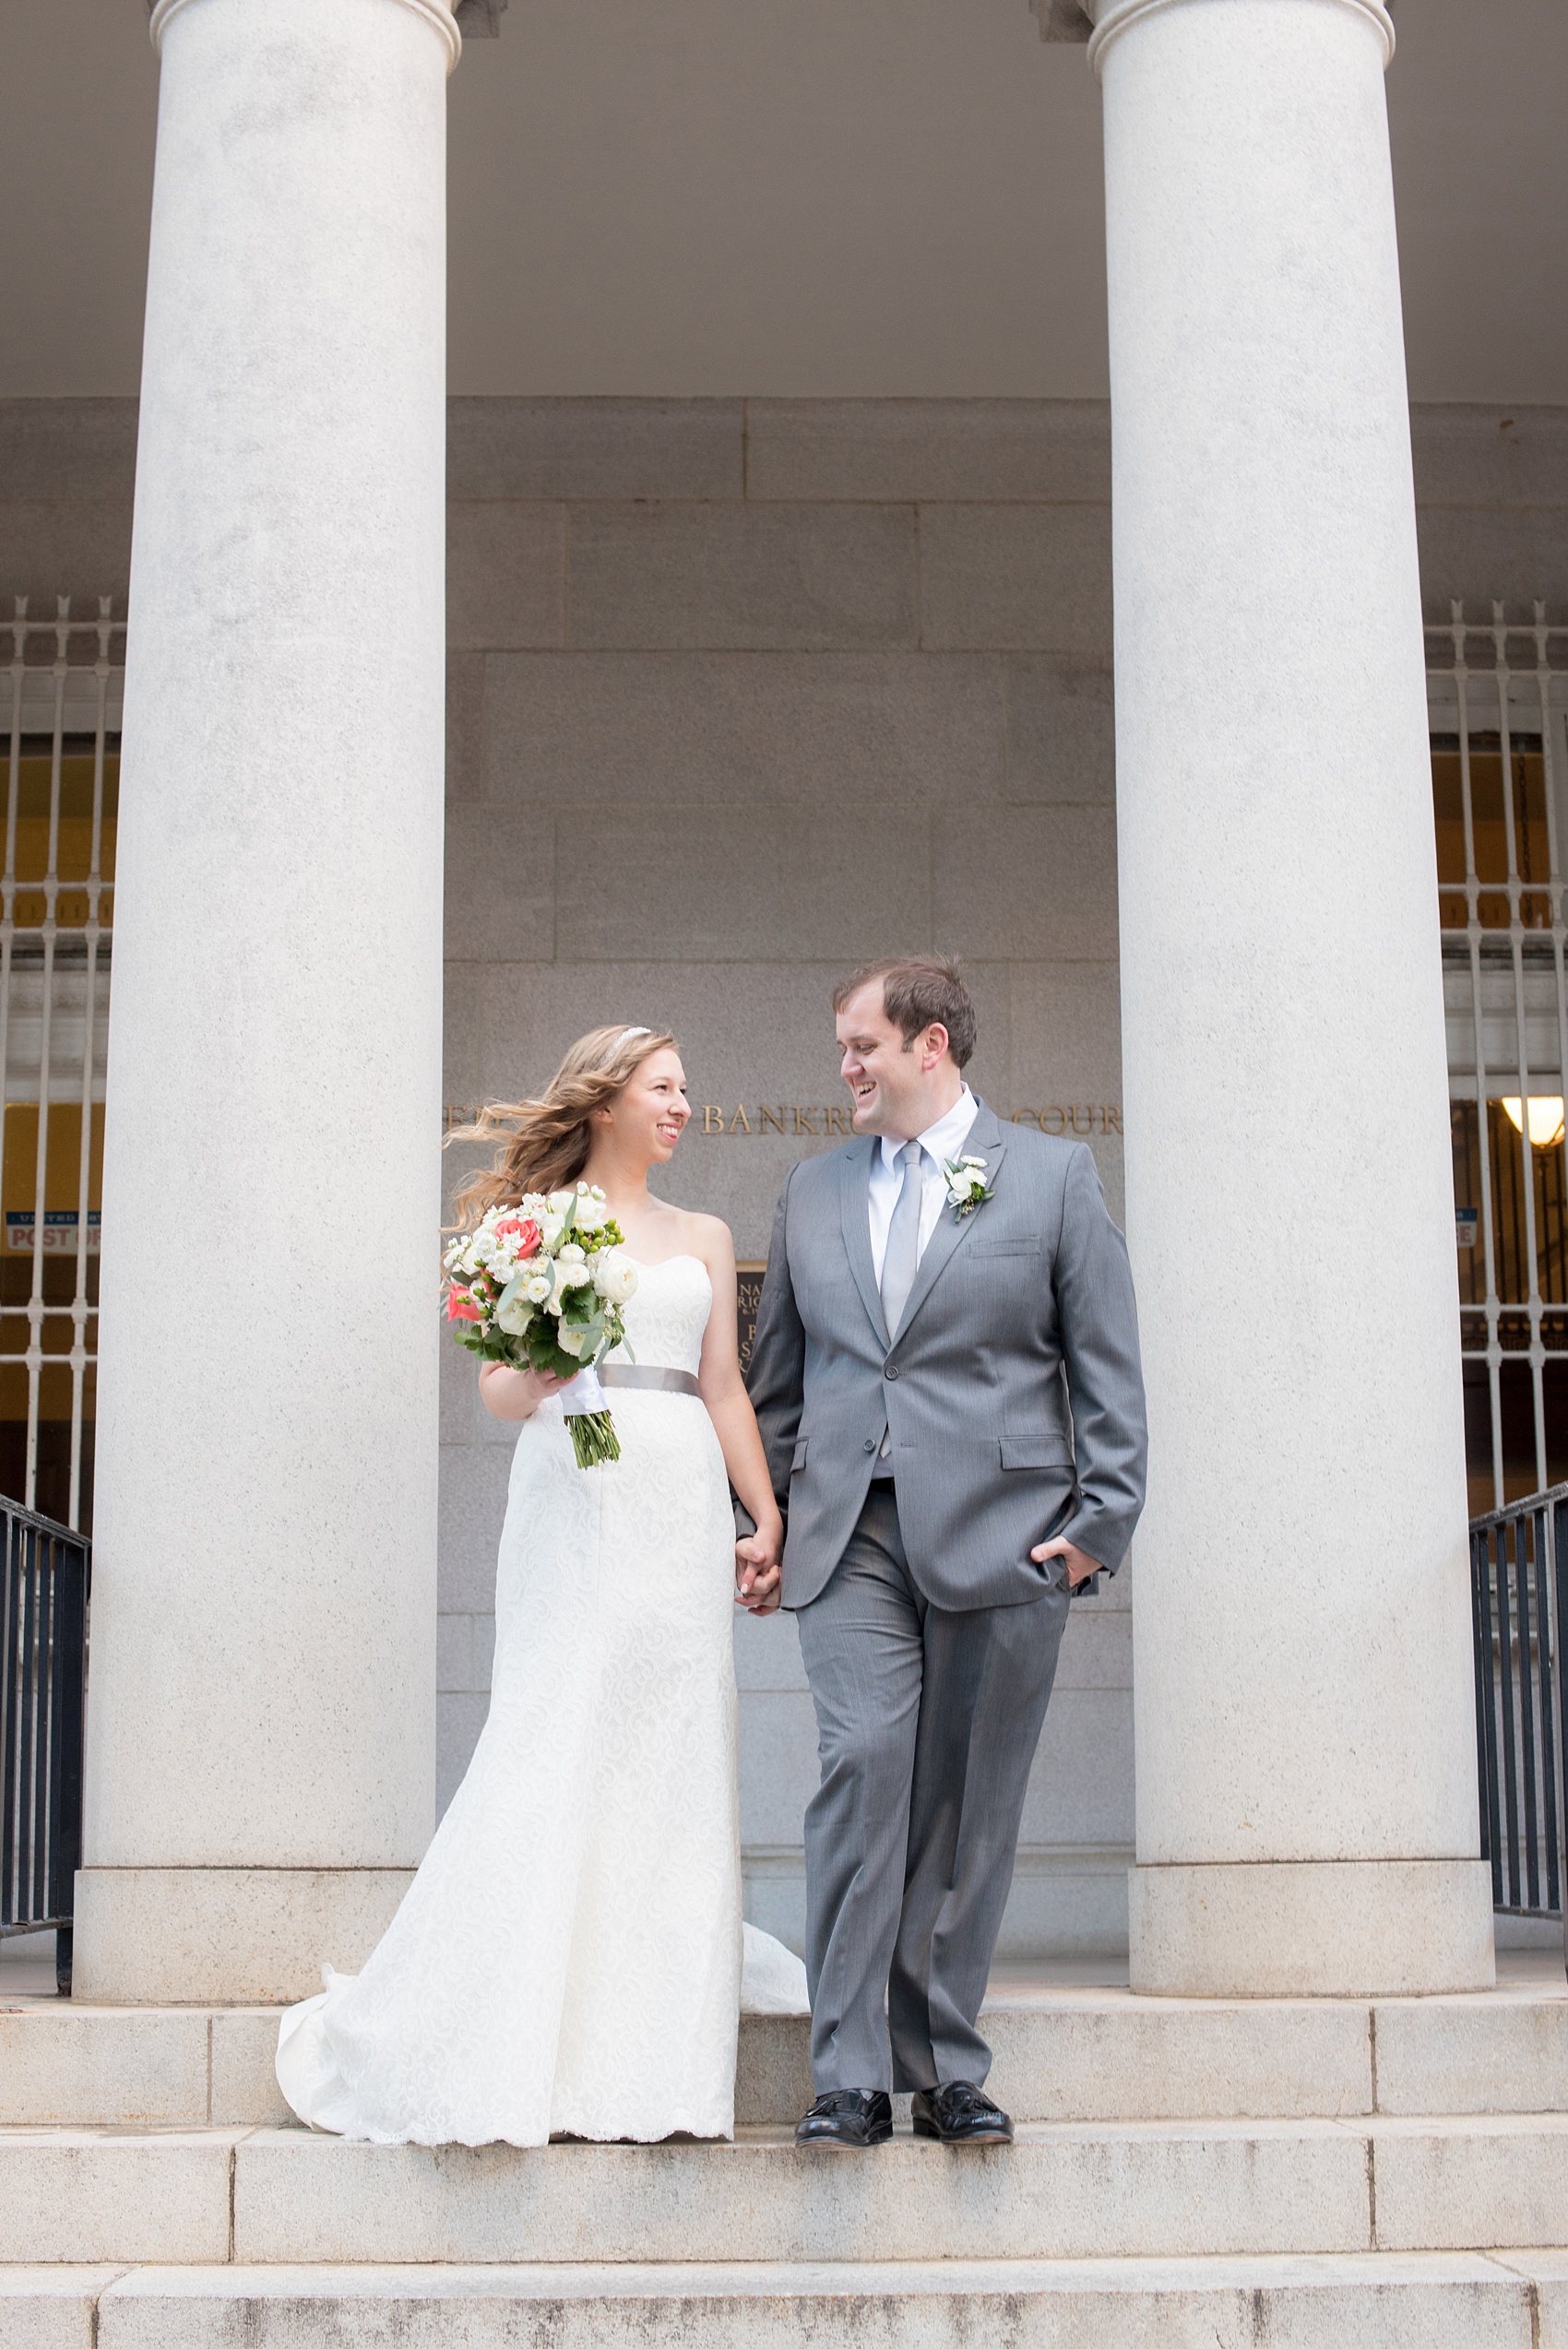 Mikkel Paige Photography photos from a wedding at The Stockroom at 230. A picture of the bride and groom in downtown Raleigh with columns and iconic architecture.